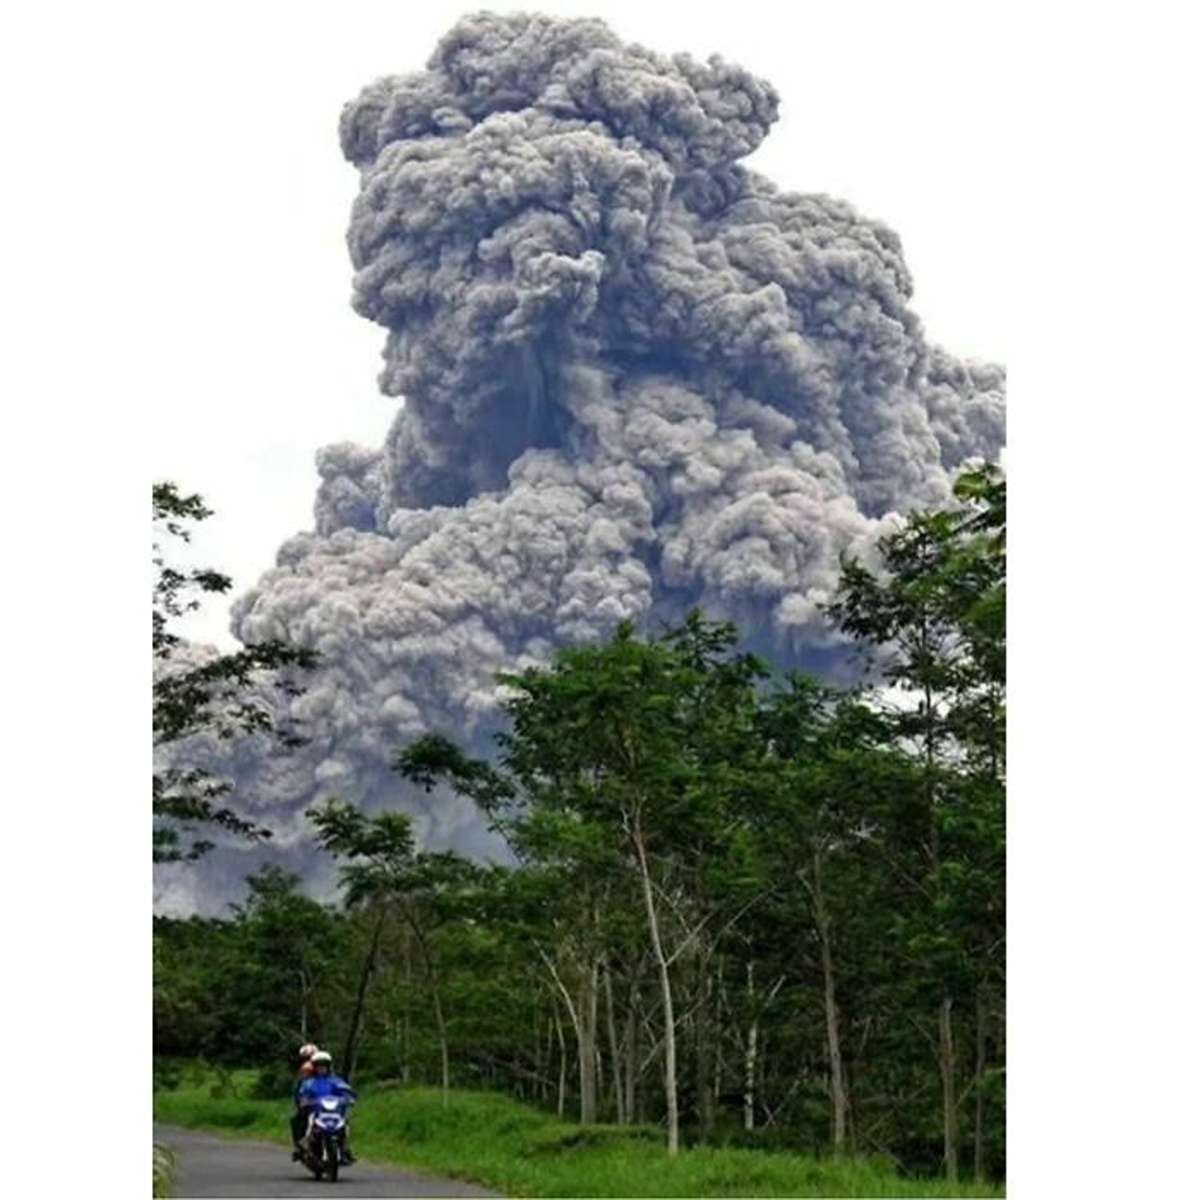 Climactic Eruption Of The Mount Pinatubo Volcano In The Philippines (15 June 1991), The Second-Largest Volcanic Eruption On Earth Of The 20th Century